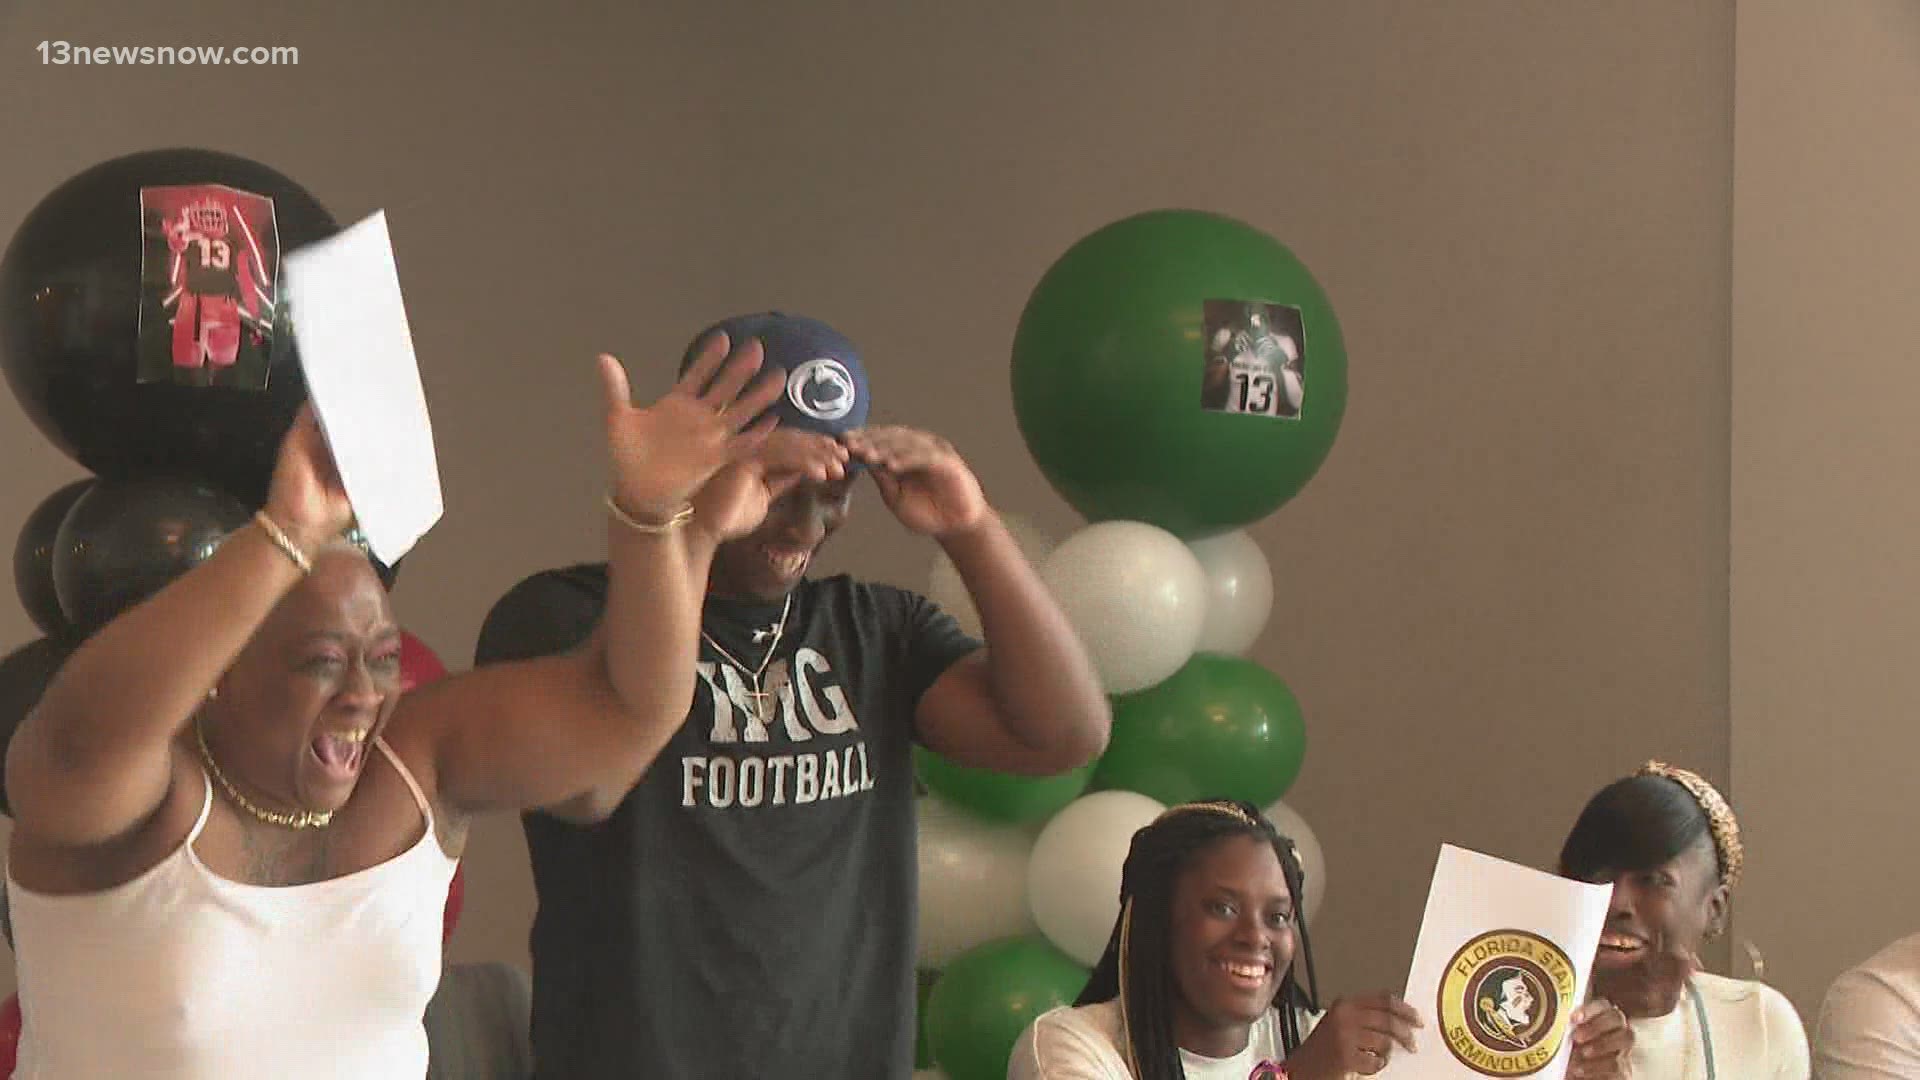 Kaytron Allen is one of the top high school running backs in the nation. He committed to the Nittany Lions on Friday.